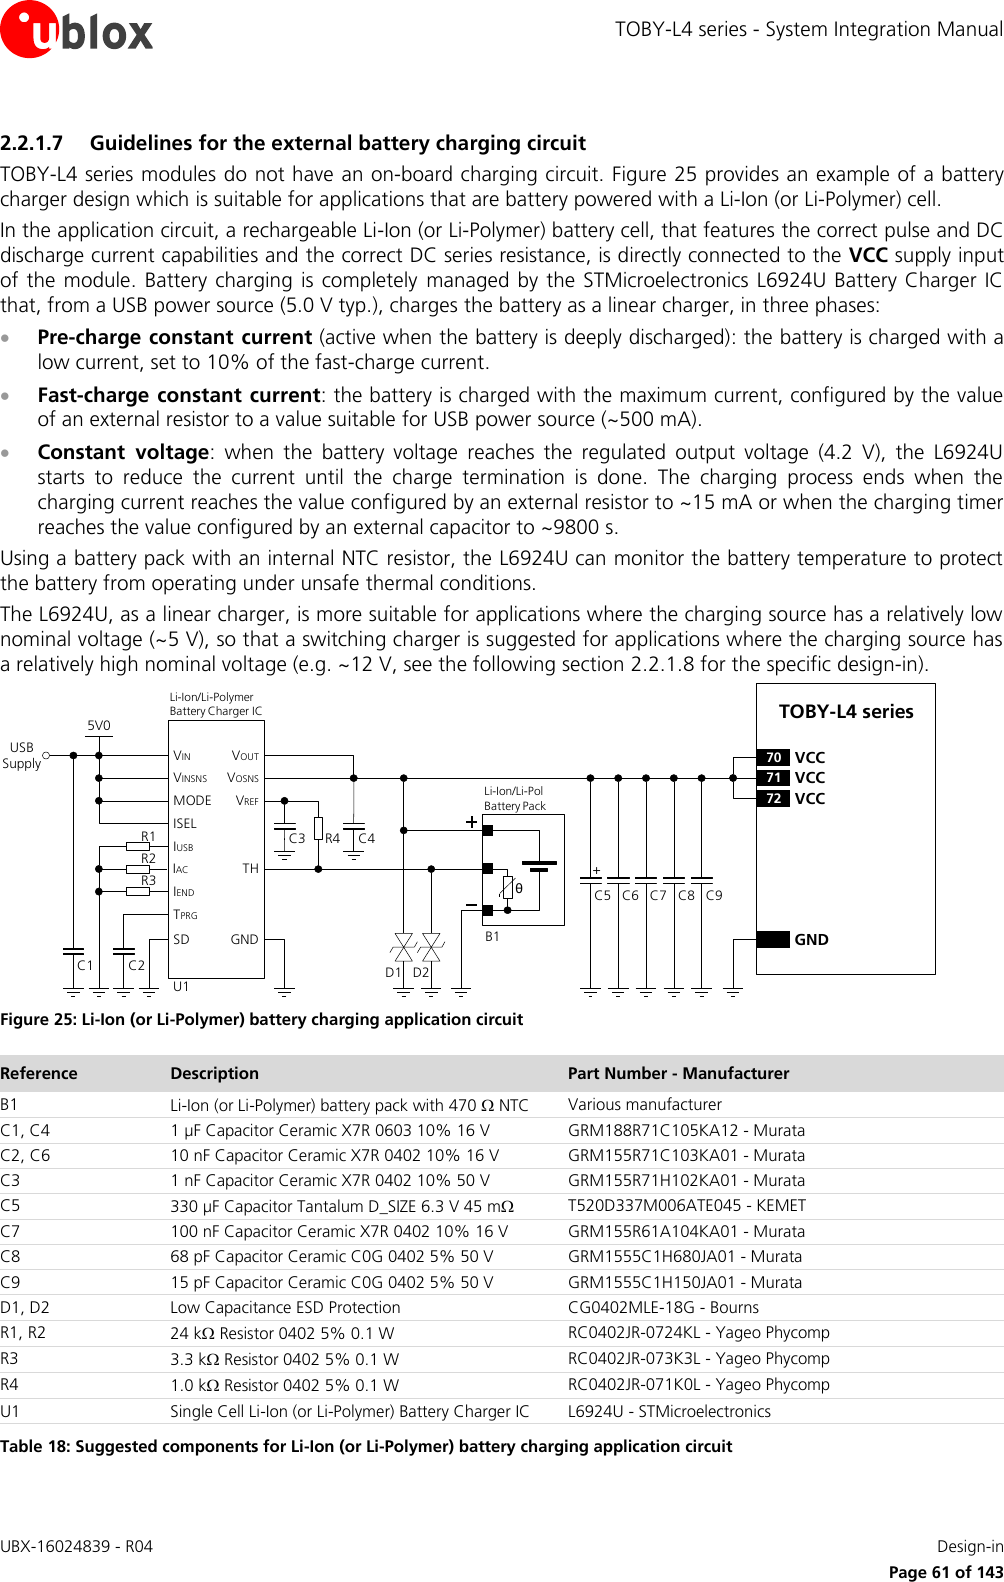 TOBY-L4 series - System Integration Manual UBX-16024839 - R04    Design-in     Page 61 of 143 2.2.1.7 Guidelines for the external battery charging circuit TOBY-L4 series modules do not have an on-board charging circuit. Figure 25 provides an example of a battery charger design which is suitable for applications that are battery powered with a Li-Ion (or Li-Polymer) cell. In the application circuit, a rechargeable Li-Ion (or Li-Polymer) battery cell, that features the correct pulse and DC discharge current capabilities and the correct DC series resistance, is directly connected to the VCC supply input of the module. Battery charging  is  completely  managed  by the STMicroelectronics  L6924U Battery  Charger IC that, from a USB power source (5.0 V typ.), charges the battery as a linear charger, in three phases:  Pre-charge constant current (active when the battery is deeply discharged): the battery is charged with a low current, set to 10% of the fast-charge current.  Fast-charge constant current: the battery is charged with the maximum current, configured by the value of an external resistor to a value suitable for USB power source (~500 mA).  Constant  voltage:  when  the  battery  voltage  reaches  the  regulated  output  voltage  (4.2  V),  the  L6924U starts  to  reduce  the  current  until  the  charge  termination  is  done.  The  charging  process  ends  when  the charging current reaches the value configured by an external resistor to ~15 mA or when the charging timer reaches the value configured by an external capacitor to ~9800 s. Using a battery pack with an internal NTC resistor, the L6924U can monitor the battery temperature to protect the battery from operating under unsafe thermal conditions. The L6924U, as a linear charger, is more suitable for applications where the charging source has a relatively low nominal voltage (~5 V), so that a switching charger is suggested for applications where the charging source has a relatively high nominal voltage (e.g. ~12 V, see the following section 2.2.1.8 for the specific design-in). C5 C8C7C6 C9GNDTOBY-L4 series71 VCC72 VCC70 VCC+USB SupplyC3 R4θU1IUSBIACIENDTPRGSDVINVINSNSMODEISELC2C15V0THGNDVOUTVOSNSVREFR1R2R3Li-Ion/Li-Pol Battery PackD1B1C4Li-Ion/Li-Polymer    Battery Charger ICD2 Figure 25: Li-Ion (or Li-Polymer) battery charging application circuit Reference Description Part Number - Manufacturer B1 Li-Ion (or Li-Polymer) battery pack with 470  NTC Various manufacturer C1, C4 1 µF Capacitor Ceramic X7R 0603 10% 16 V GRM188R71C105KA12 - Murata C2, C6 10 nF Capacitor Ceramic X7R 0402 10% 16 V GRM155R71C103KA01 - Murata C3 1 nF Capacitor Ceramic X7R 0402 10% 50 V GRM155R71H102KA01 - Murata C5 330 µF Capacitor Tantalum D_SIZE 6.3 V 45 m T520D337M006ATE045 - KEMET C7 100 nF Capacitor Ceramic X7R 0402 10% 16 V GRM155R61A104KA01 - Murata C8 68 pF Capacitor Ceramic C0G 0402 5% 50 V GRM1555C1H680JA01 - Murata C9 15 pF Capacitor Ceramic C0G 0402 5% 50 V GRM1555C1H150JA01 - Murata D1, D2 Low Capacitance ESD Protection CG0402MLE-18G - Bourns R1, R2 24 k Resistor 0402 5% 0.1 W RC0402JR-0724KL - Yageo Phycomp R3 3.3 k Resistor 0402 5% 0.1 W RC0402JR-073K3L - Yageo Phycomp R4 1.0 k Resistor 0402 5% 0.1 W RC0402JR-071K0L - Yageo Phycomp U1 Single Cell Li-Ion (or Li-Polymer) Battery Charger IC  L6924U - STMicroelectronics Table 18: Suggested components for Li-Ion (or Li-Polymer) battery charging application circuit  